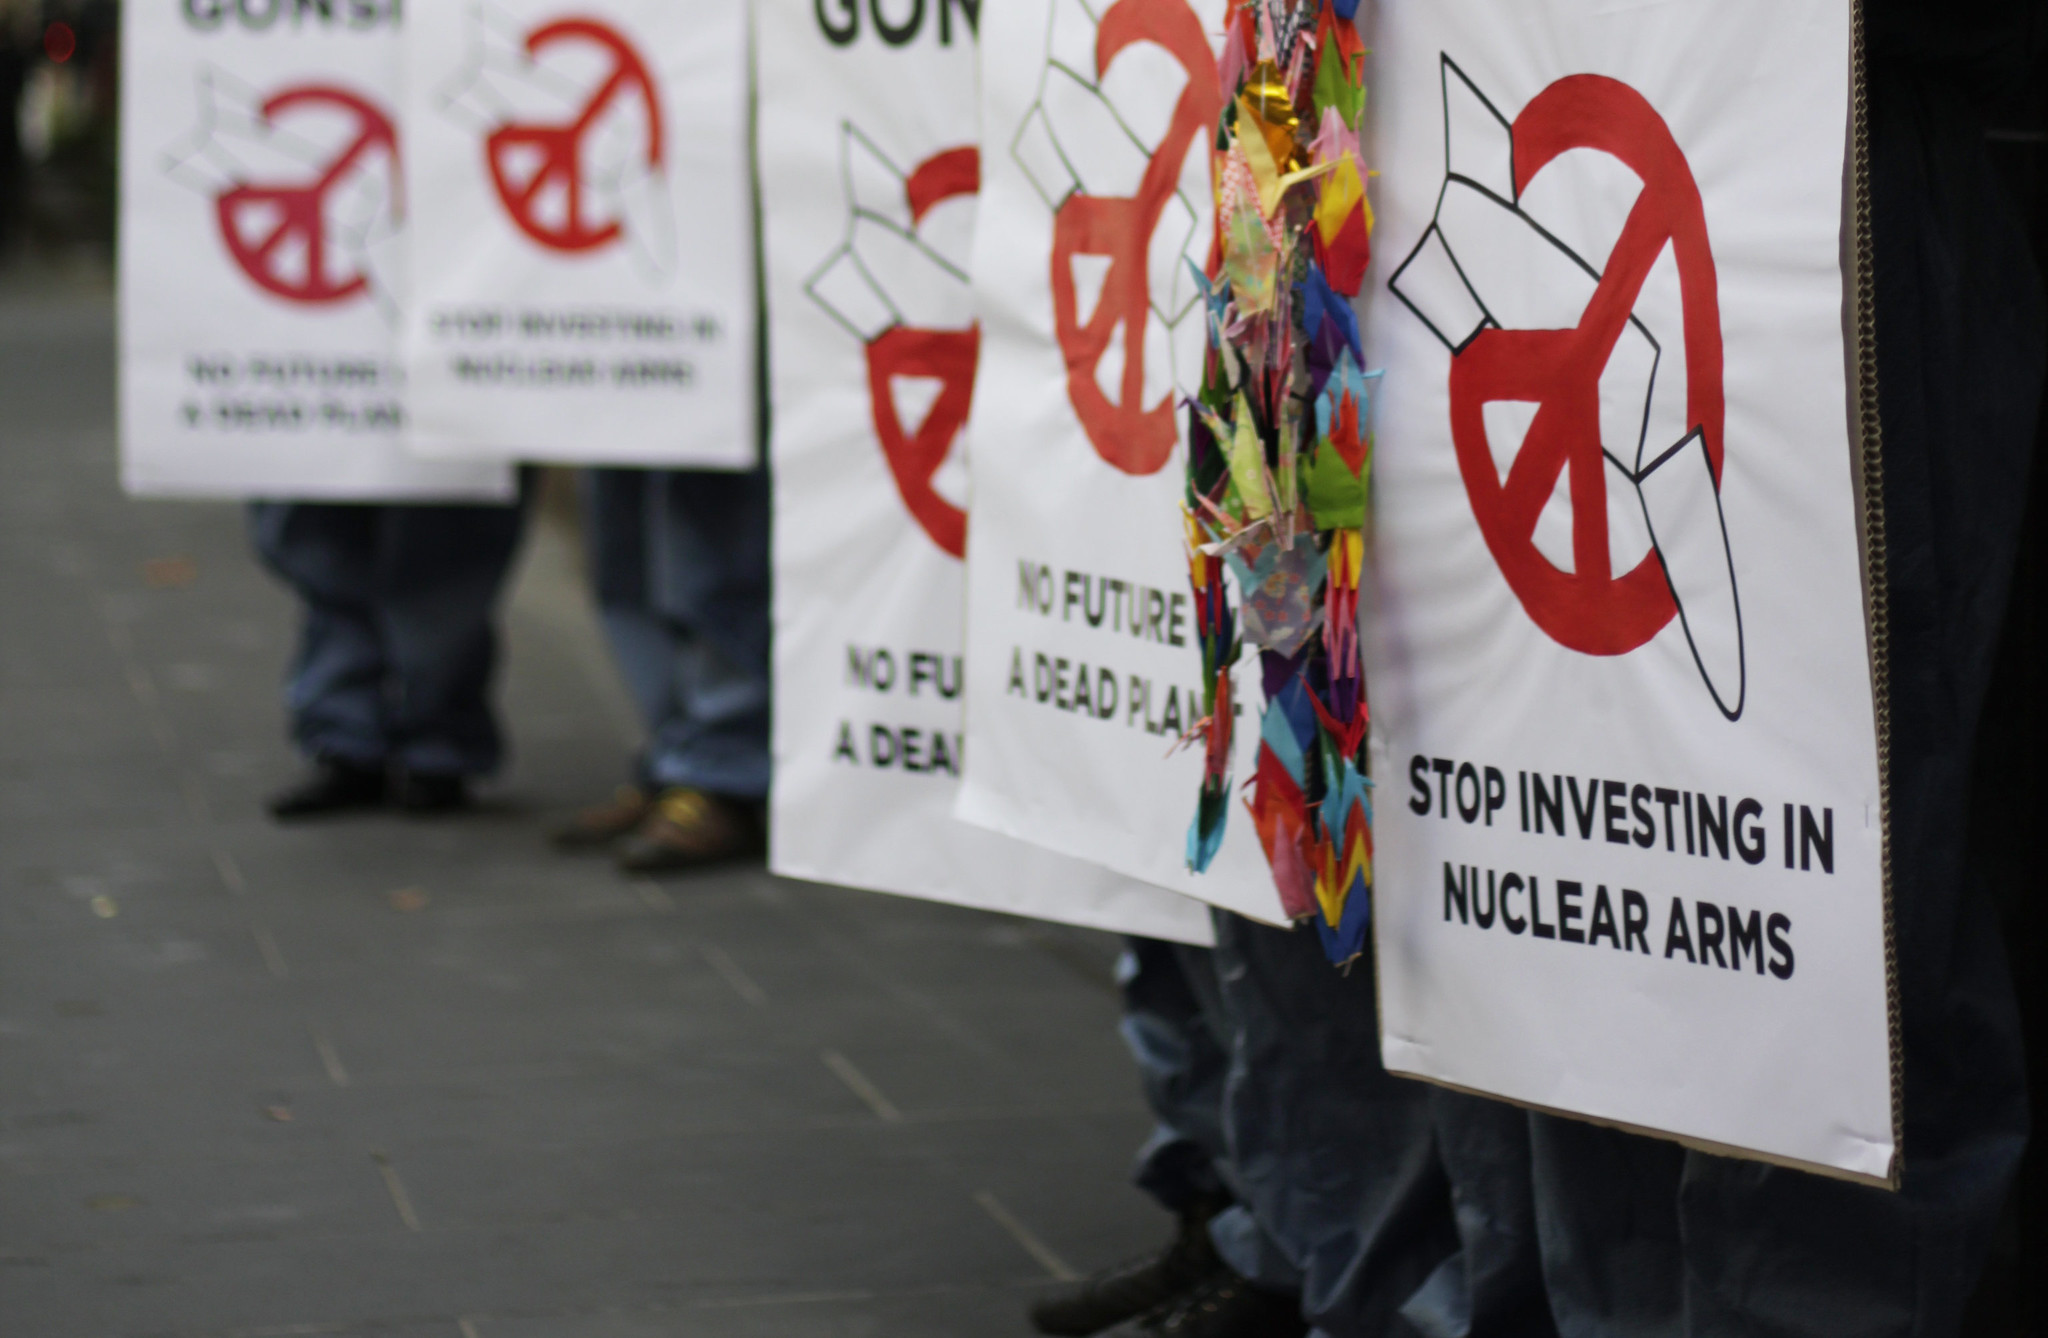 April 2012: International Campaign to Abolish Nuclear Weapons action against investments in nuclear weapons, Melbourne, Australia. (Tim Wright, ICAN, Flickr, CC BY 2.0)